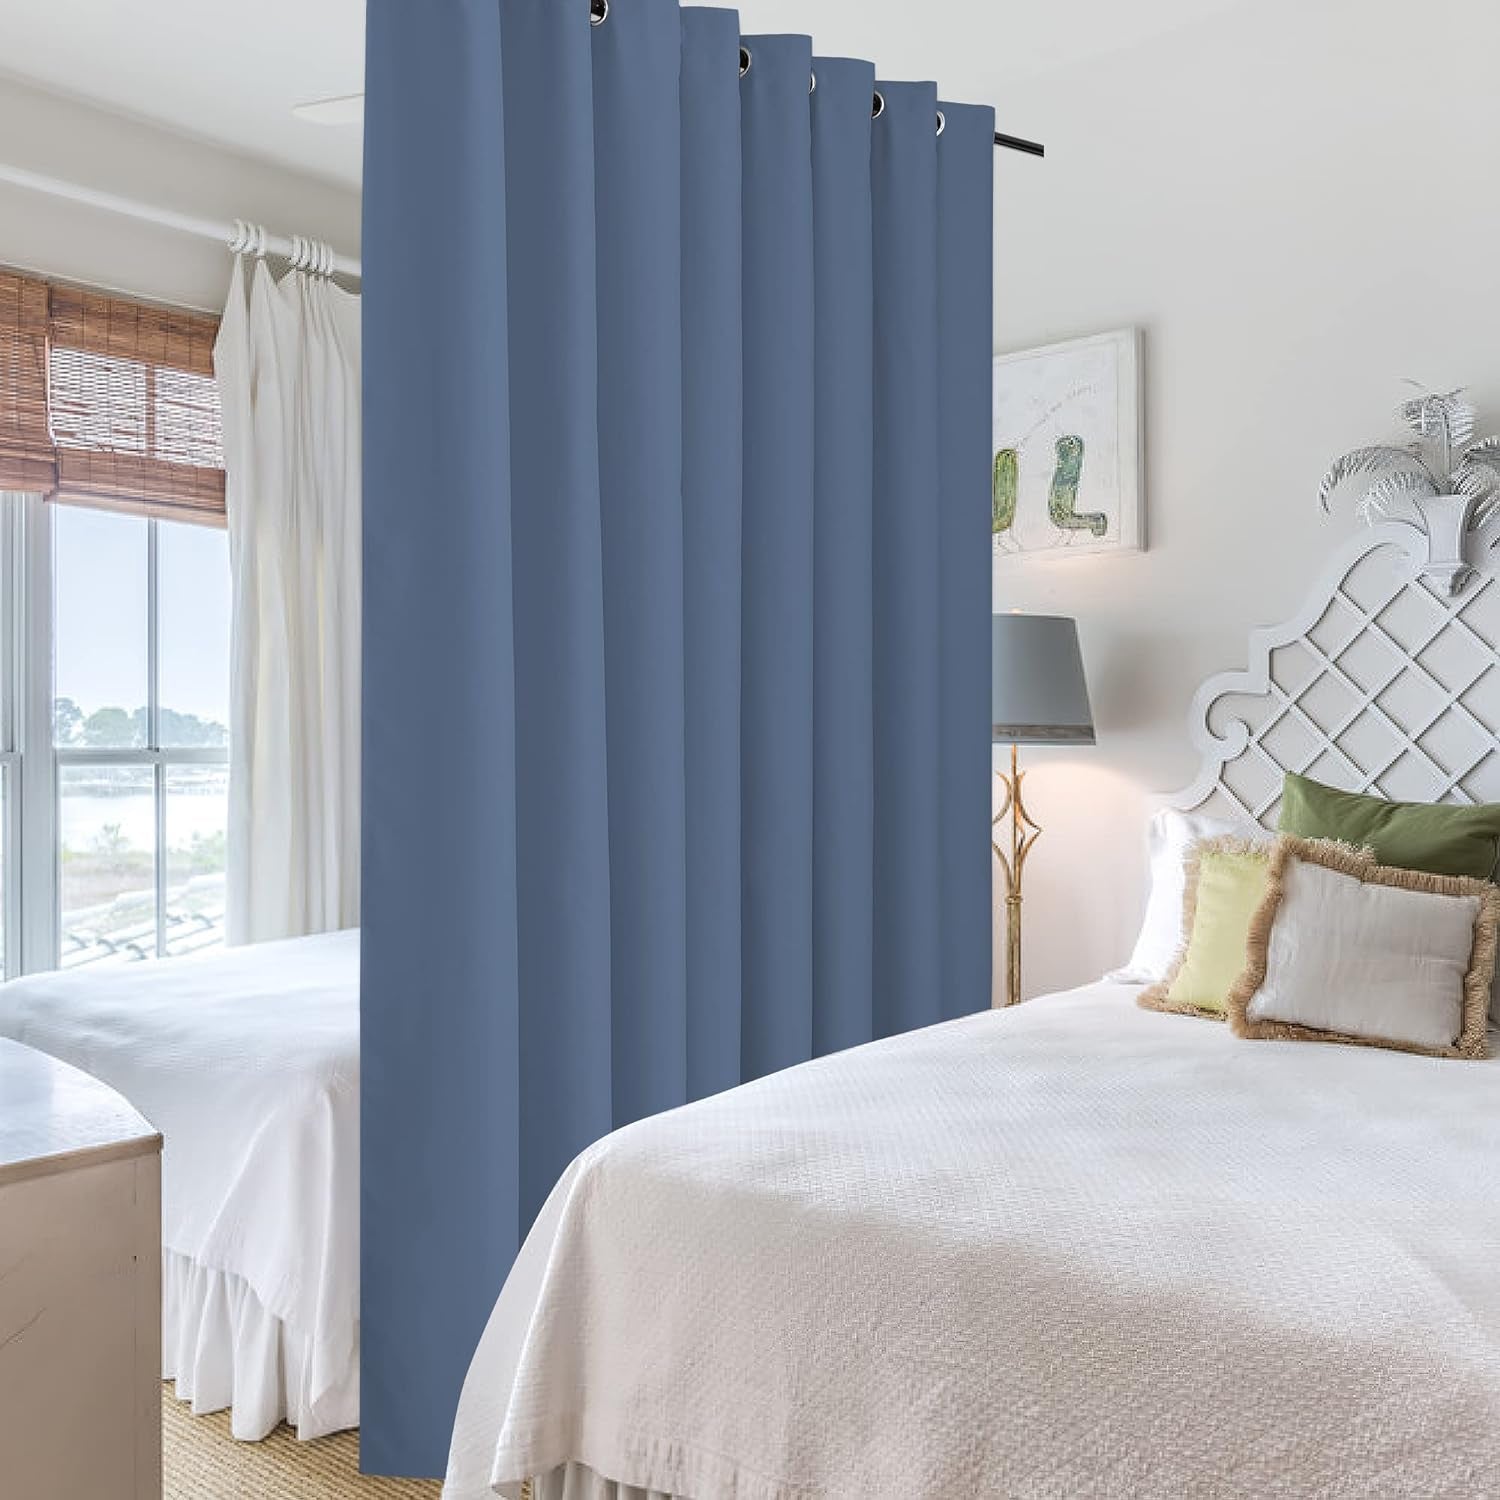 RYB HOME Room Divider Curtains - Privacy Blackout Thermal Insulating Large Window Curtains for Backdrop Patio Sliding Glass Door Operable Patitions, W 15Ft X L 9Ft, Stone Blue, 1 Panel  RYB HOME   